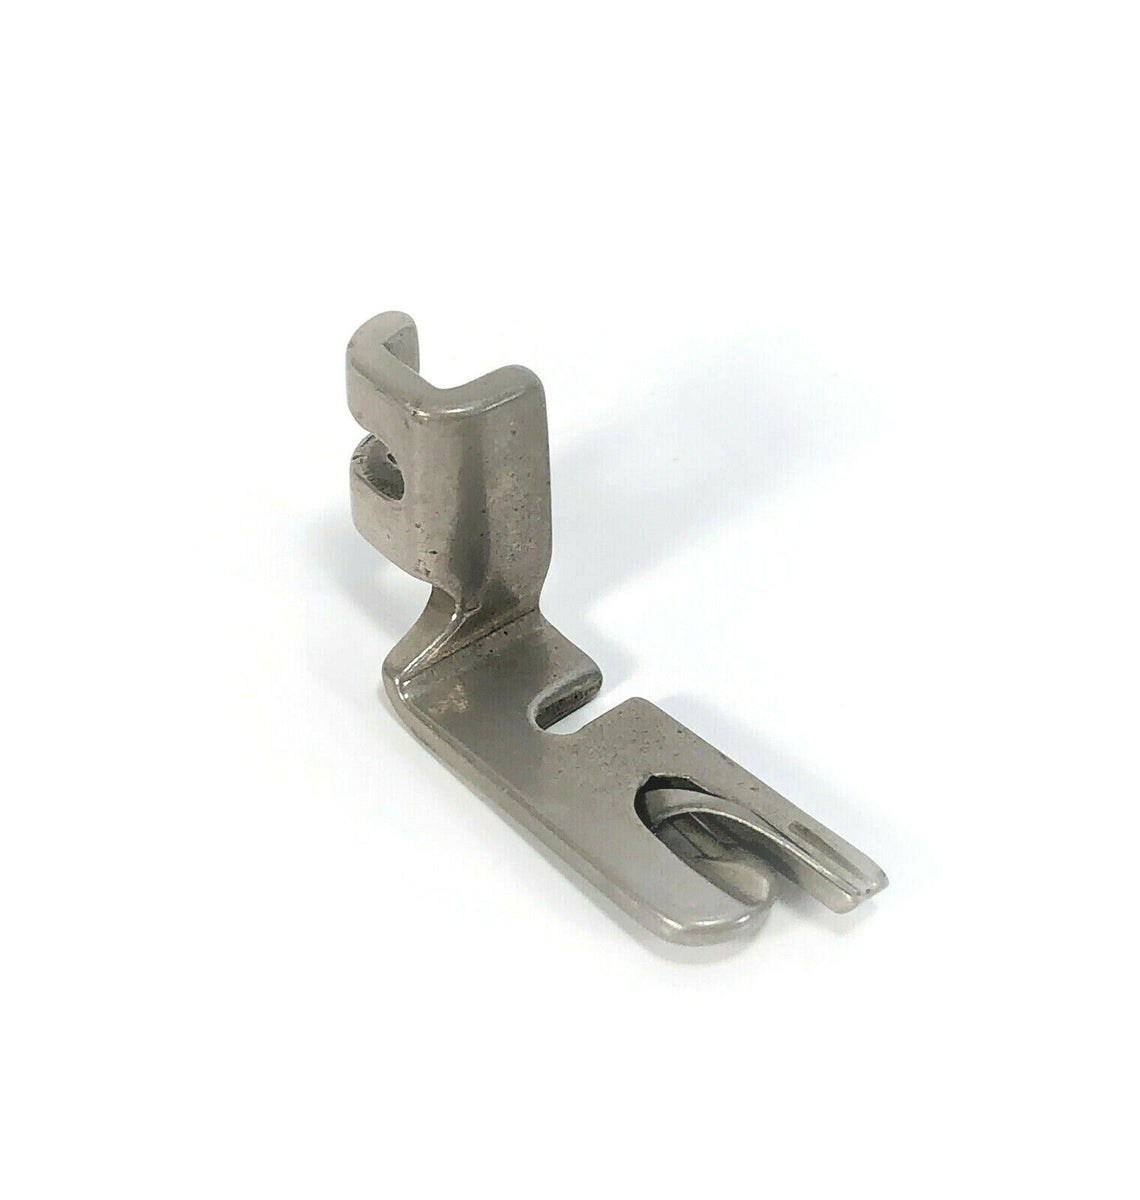 Narrow Rolled Hemmer Foot Attachment, 1/4 Inch 6mm – The Singer